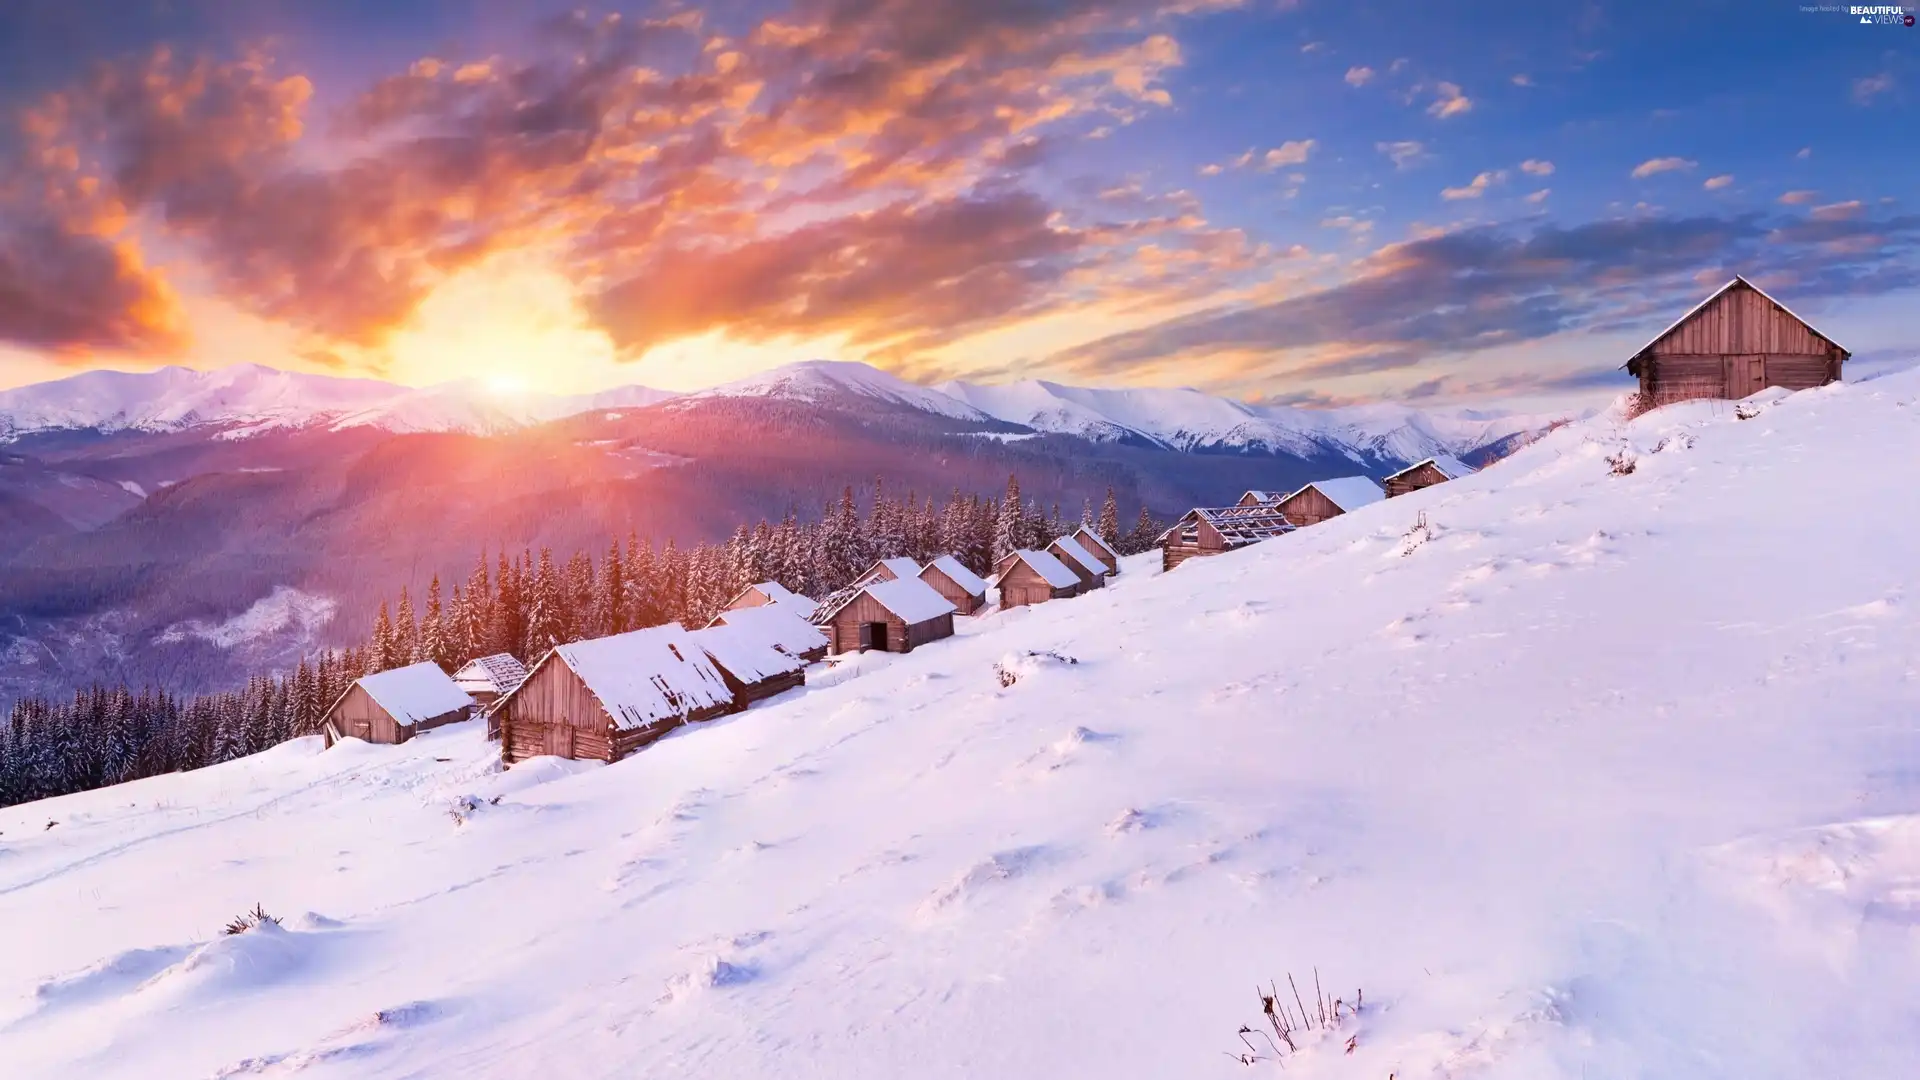 Mountains, west, Houses, winter, forest, sun